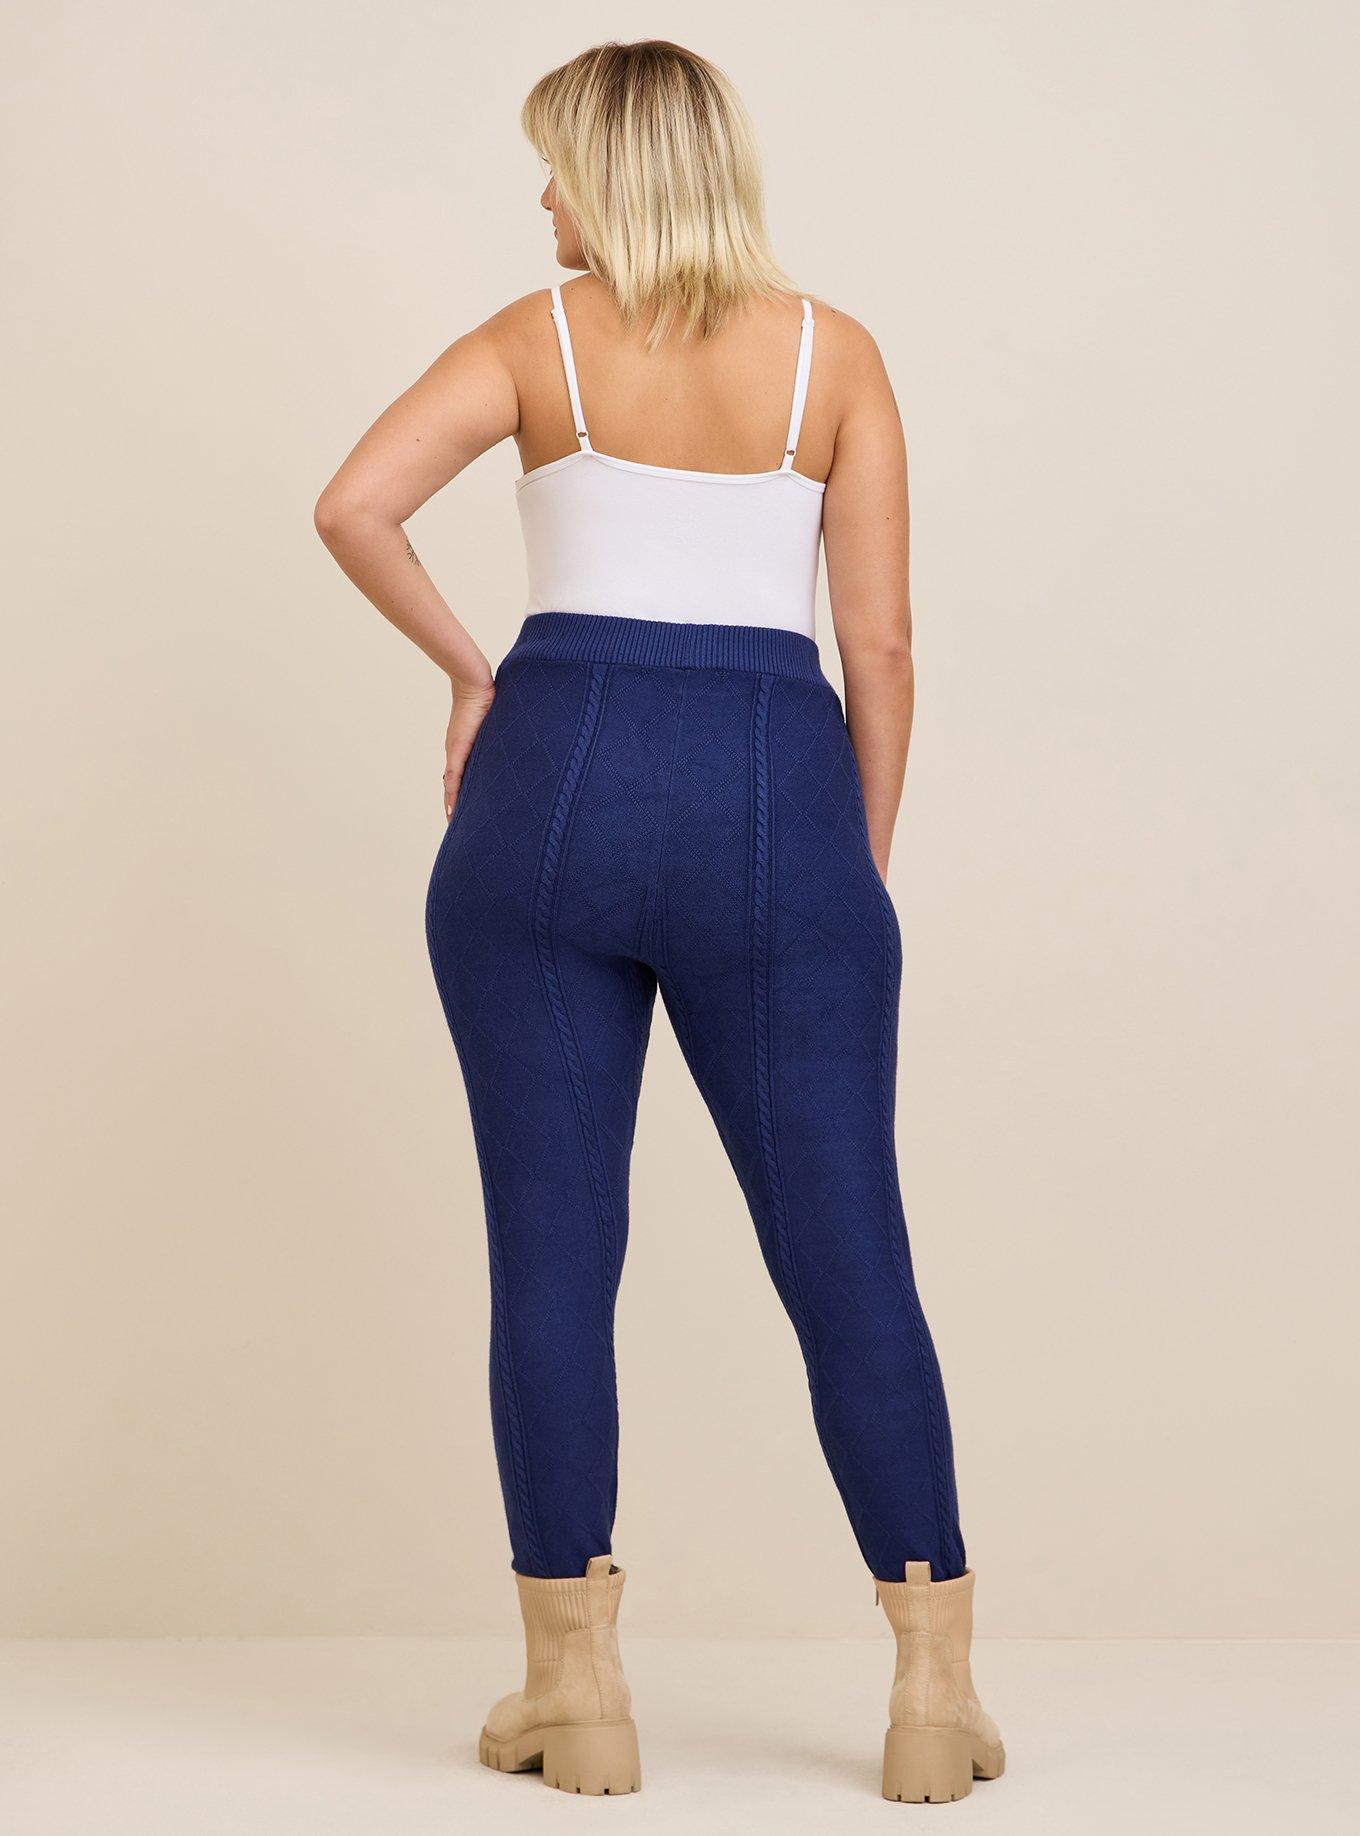 Plus Size Wide Waistband Cable Knit Leggings